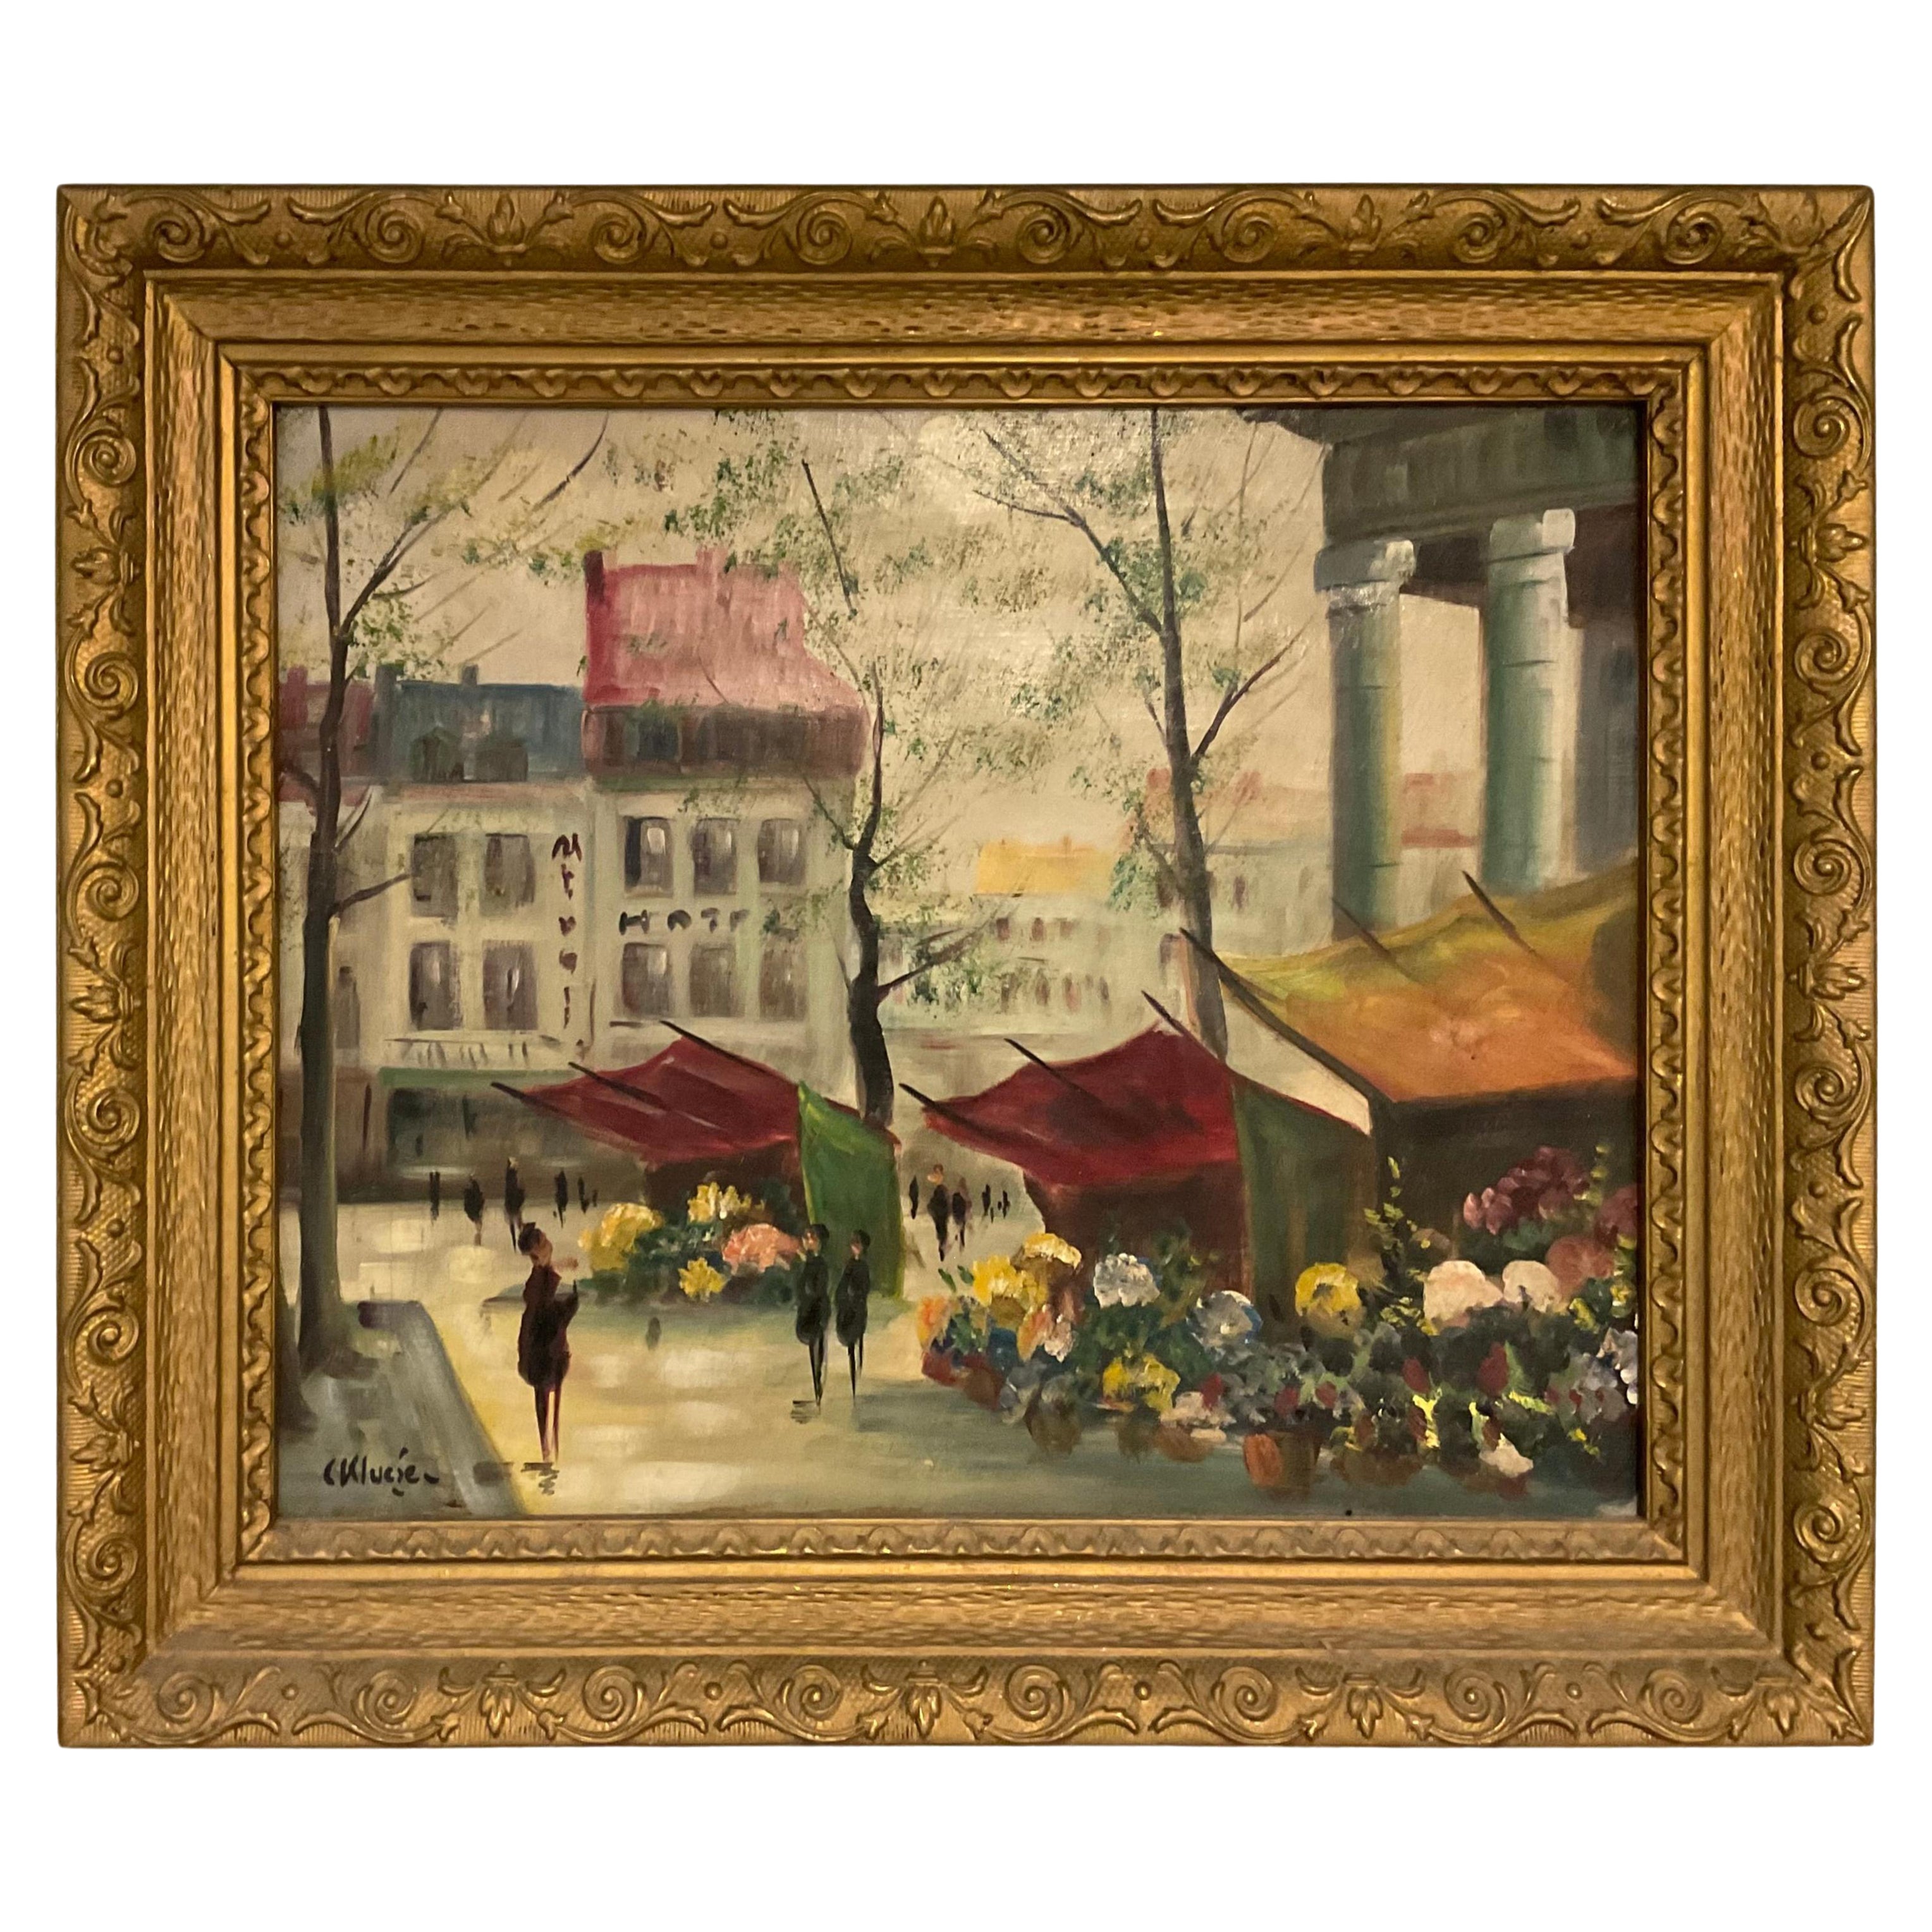 Constantin Kluge vibrant oil painting on Canvas City Scene France 